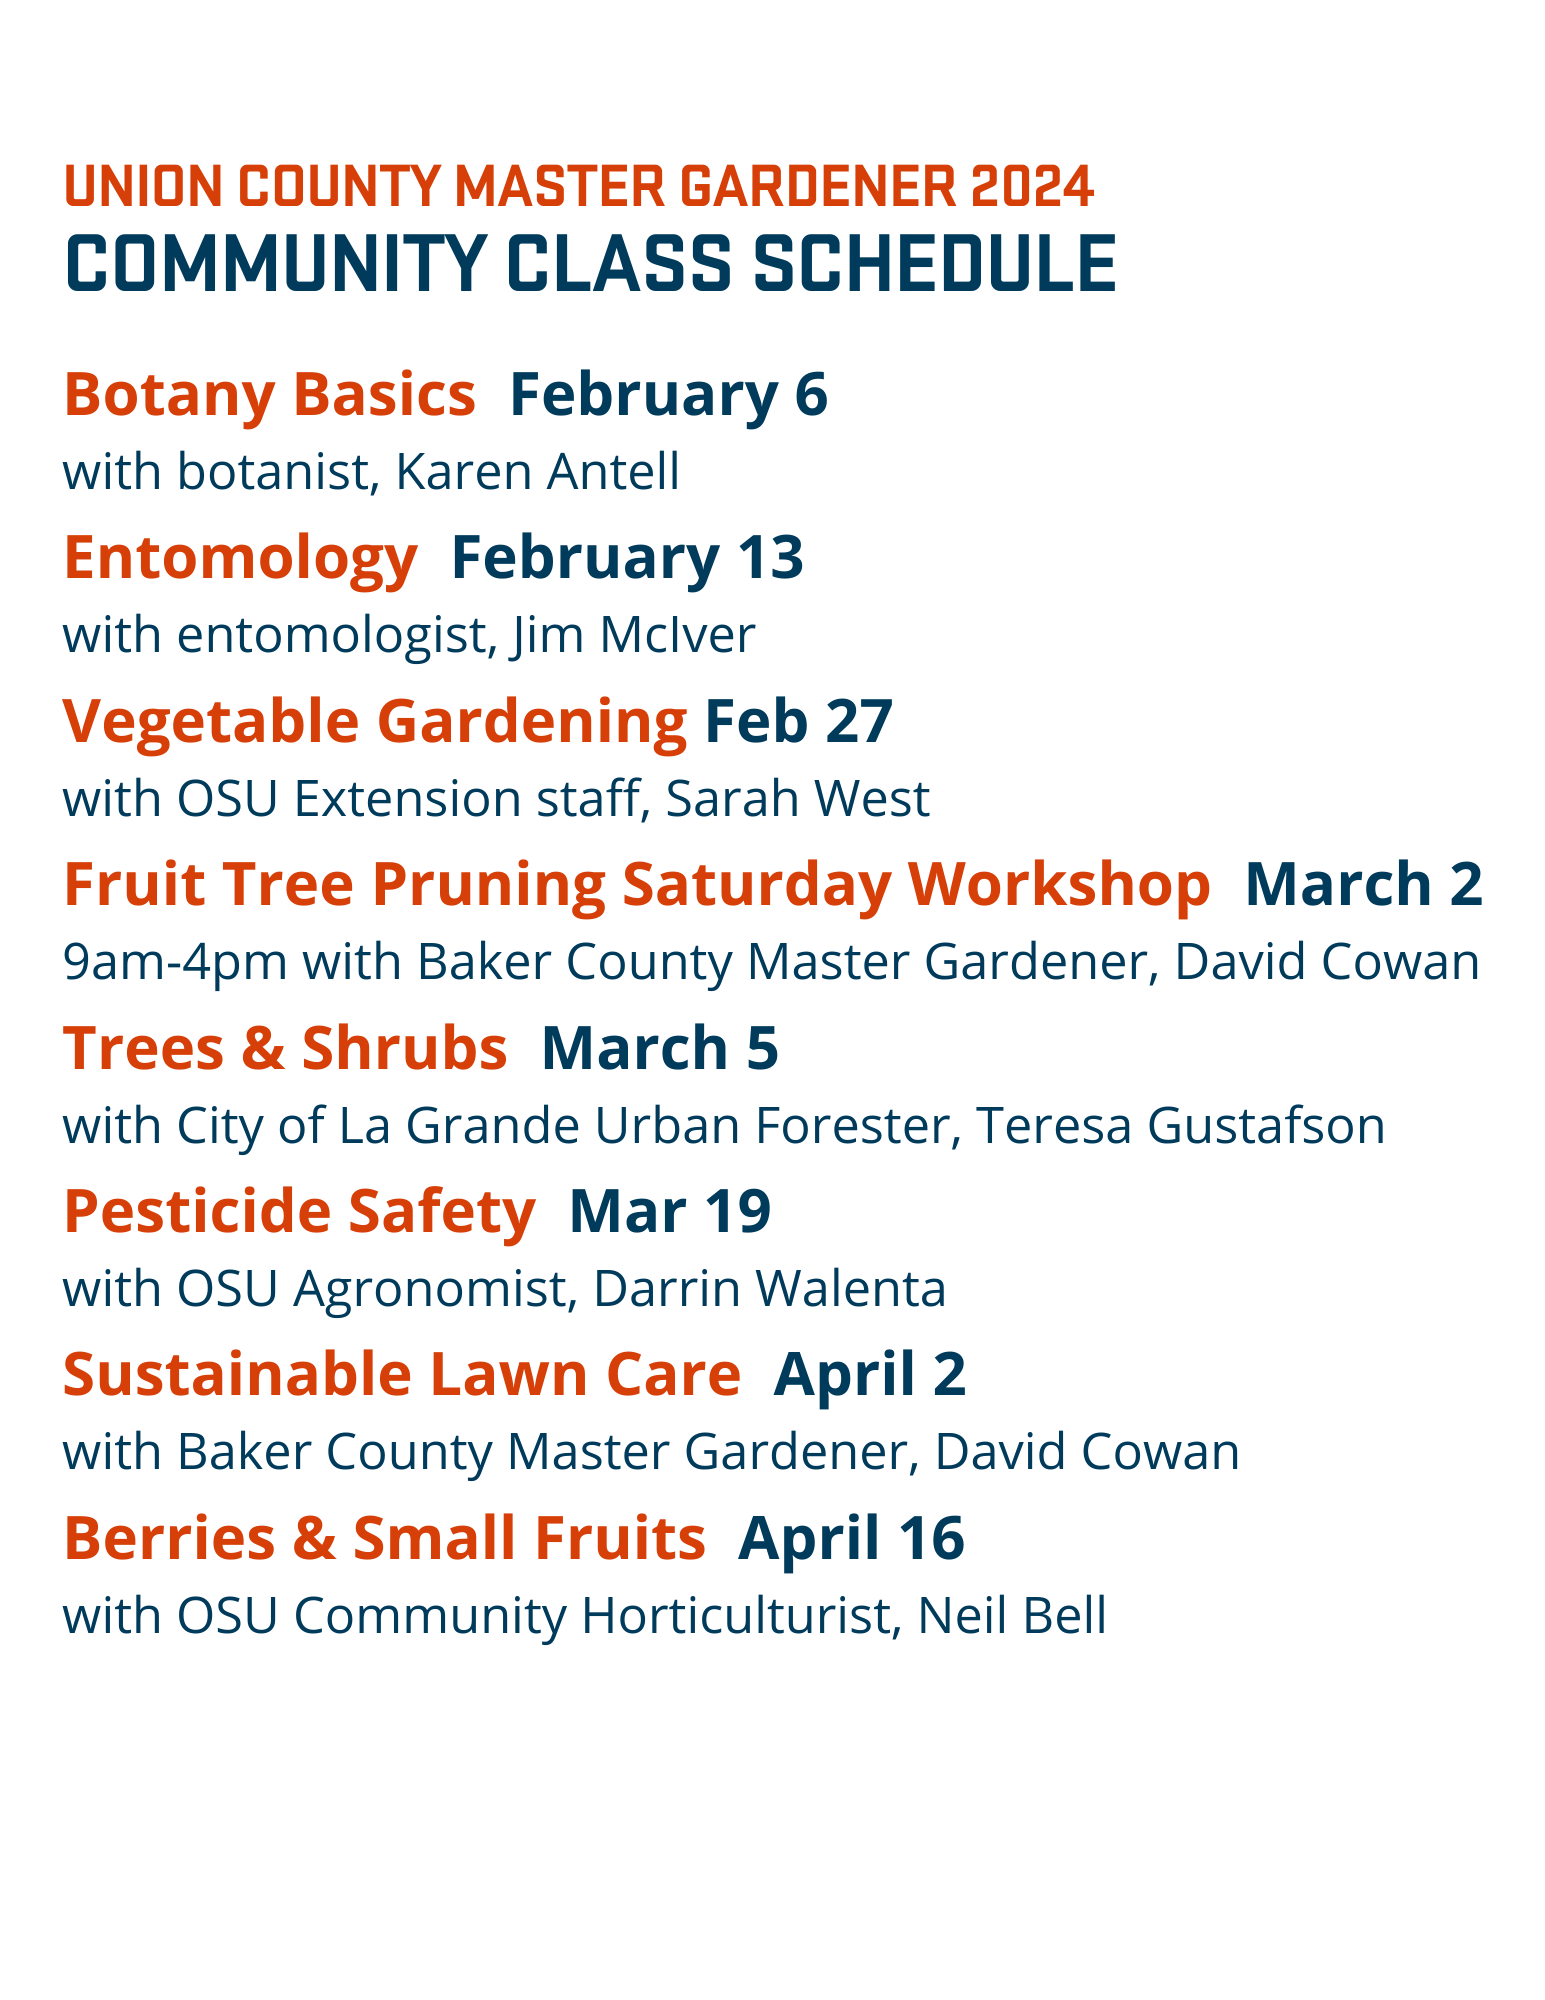 Union County Master Gardener 2024 Community Class Schedule: Botany Basics February 6  with Karen Antell, Entomology February 13 with Jim McIver, Vegetable Gardening February 27 with Sarah West, Fruit Tree Pruning Saturday Workshop March 2  9am-4pm with David Cowan, Trees & Shrubs March 5 with Teresa Gustafson, Pesticide Safety March 19 with Darrin Walenta, Sustainable Lawn Care April 2 with David Cowan, Berries & Small Fruits, April 16 with Neil Bell